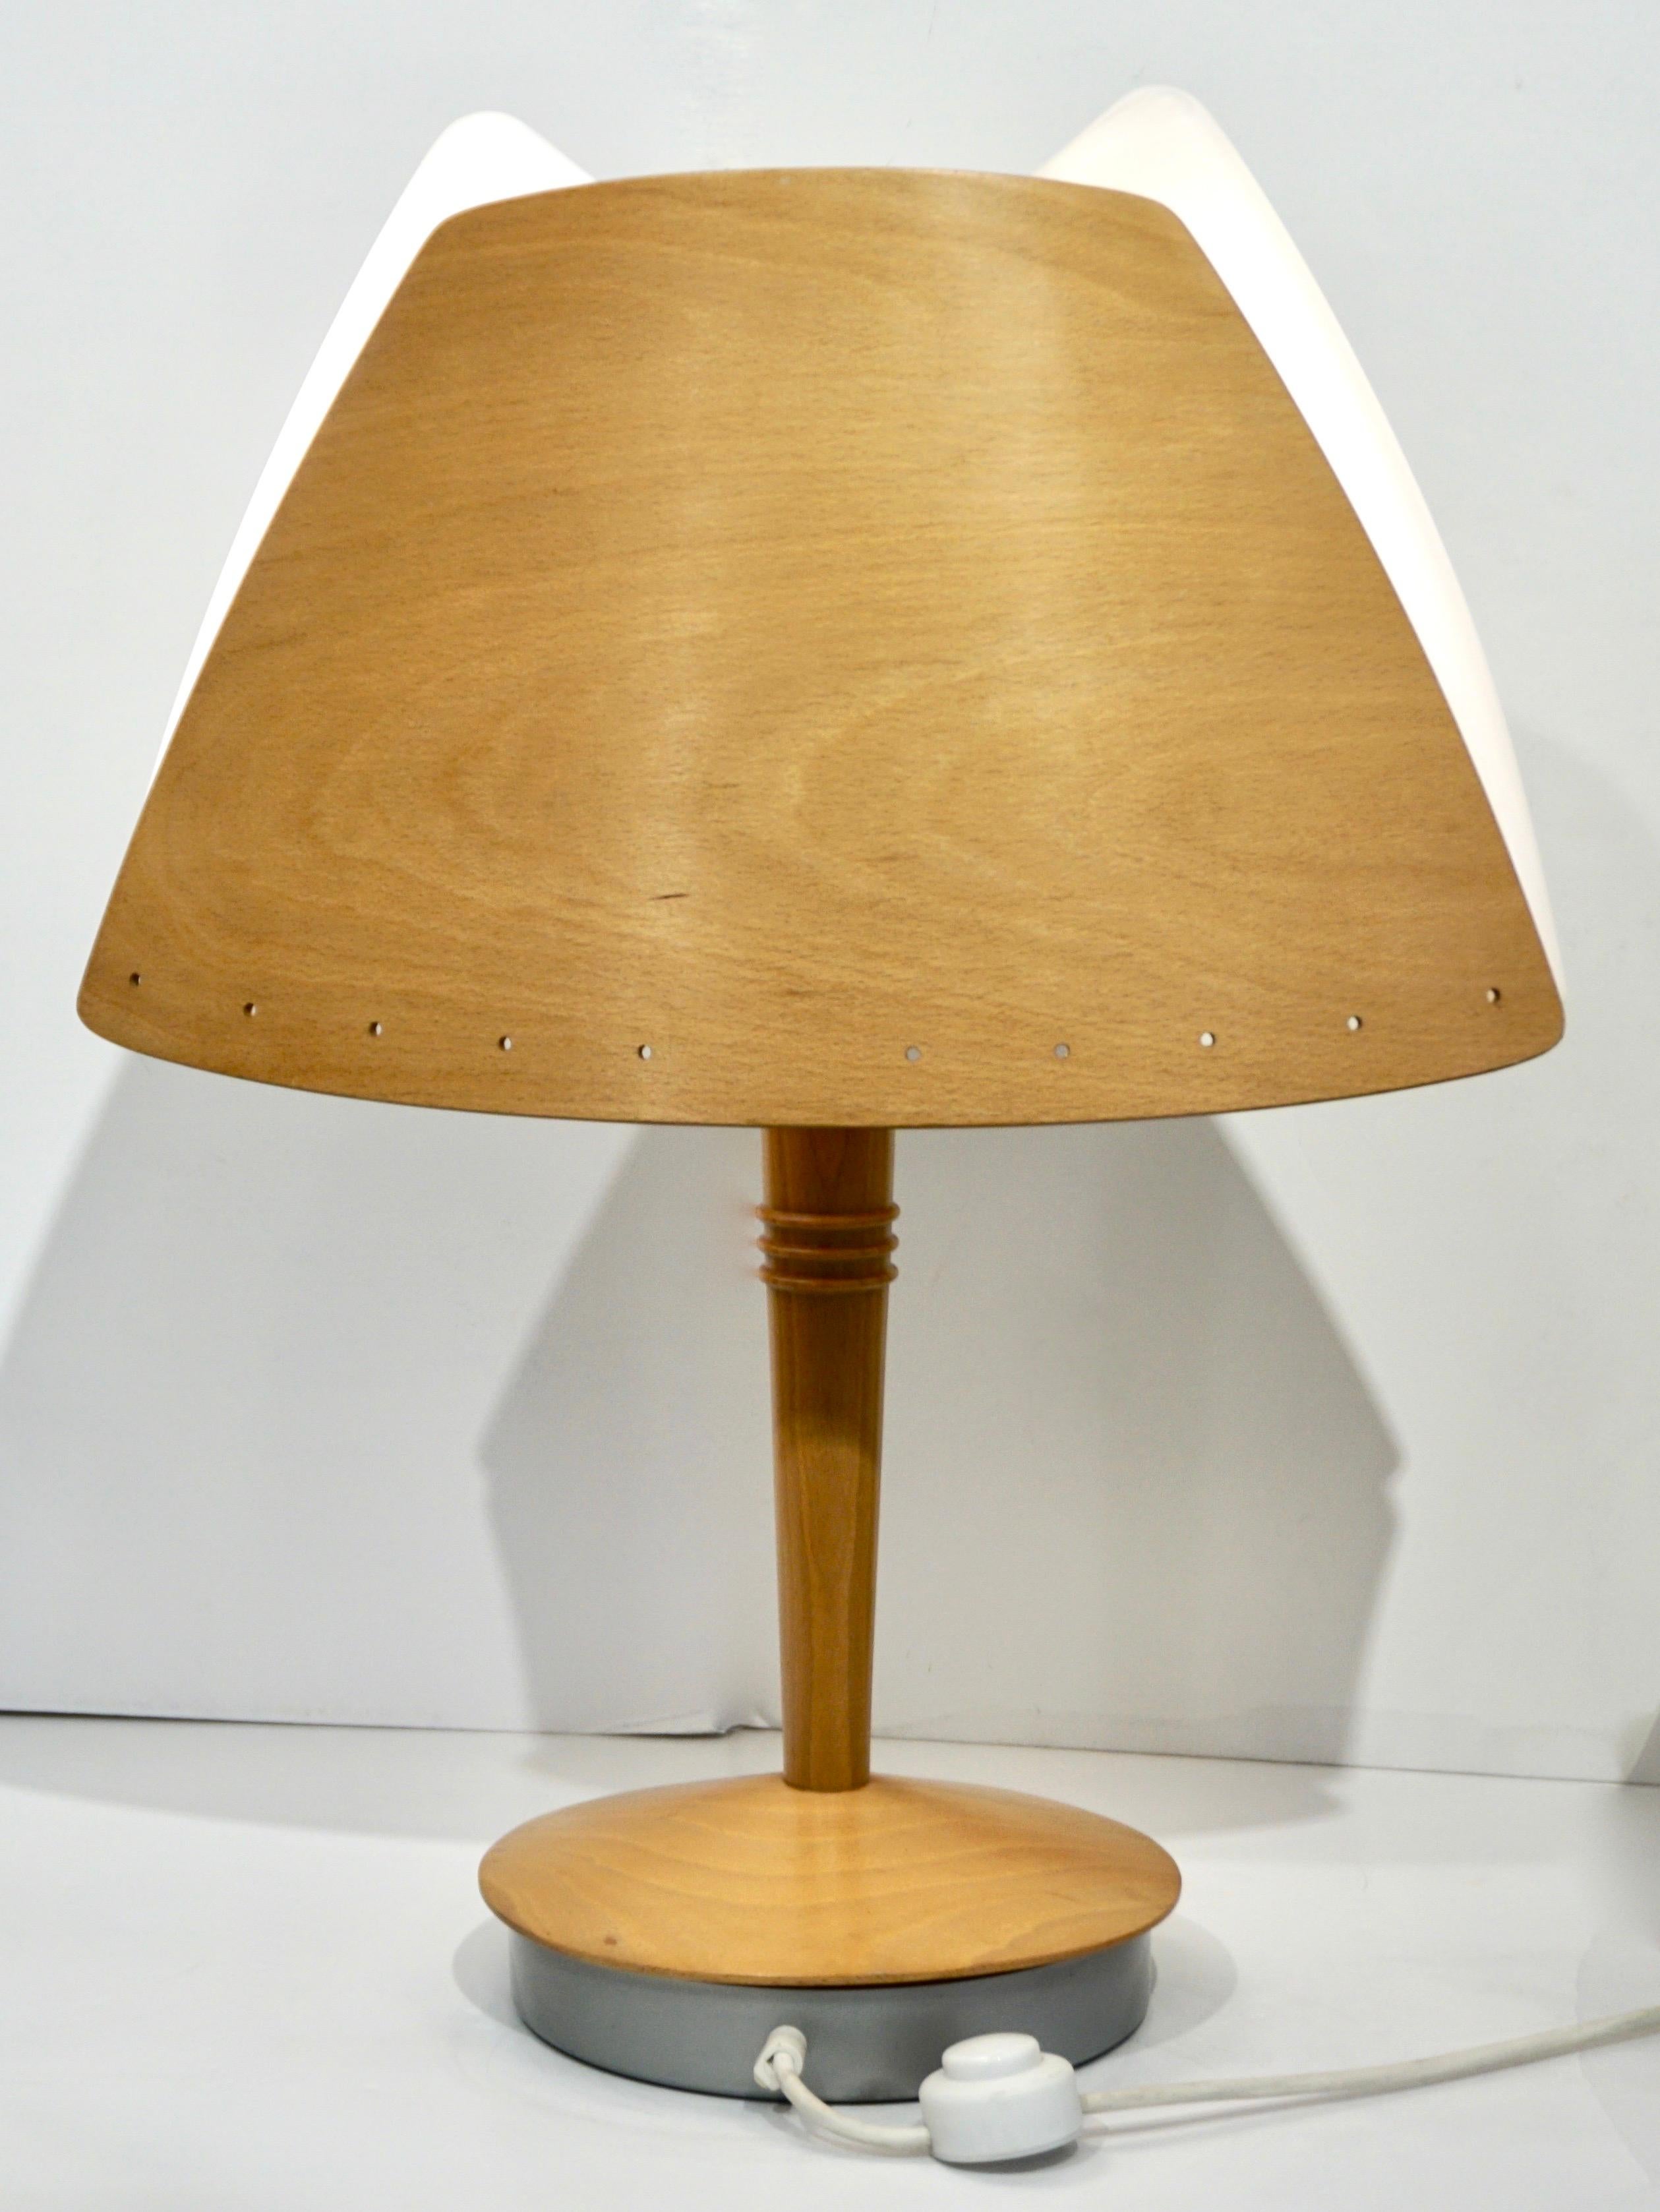 1970 French Vintage Birch Wood and Acrylic Table Lamp for Barcelona Hilton Hotel For Sale 2